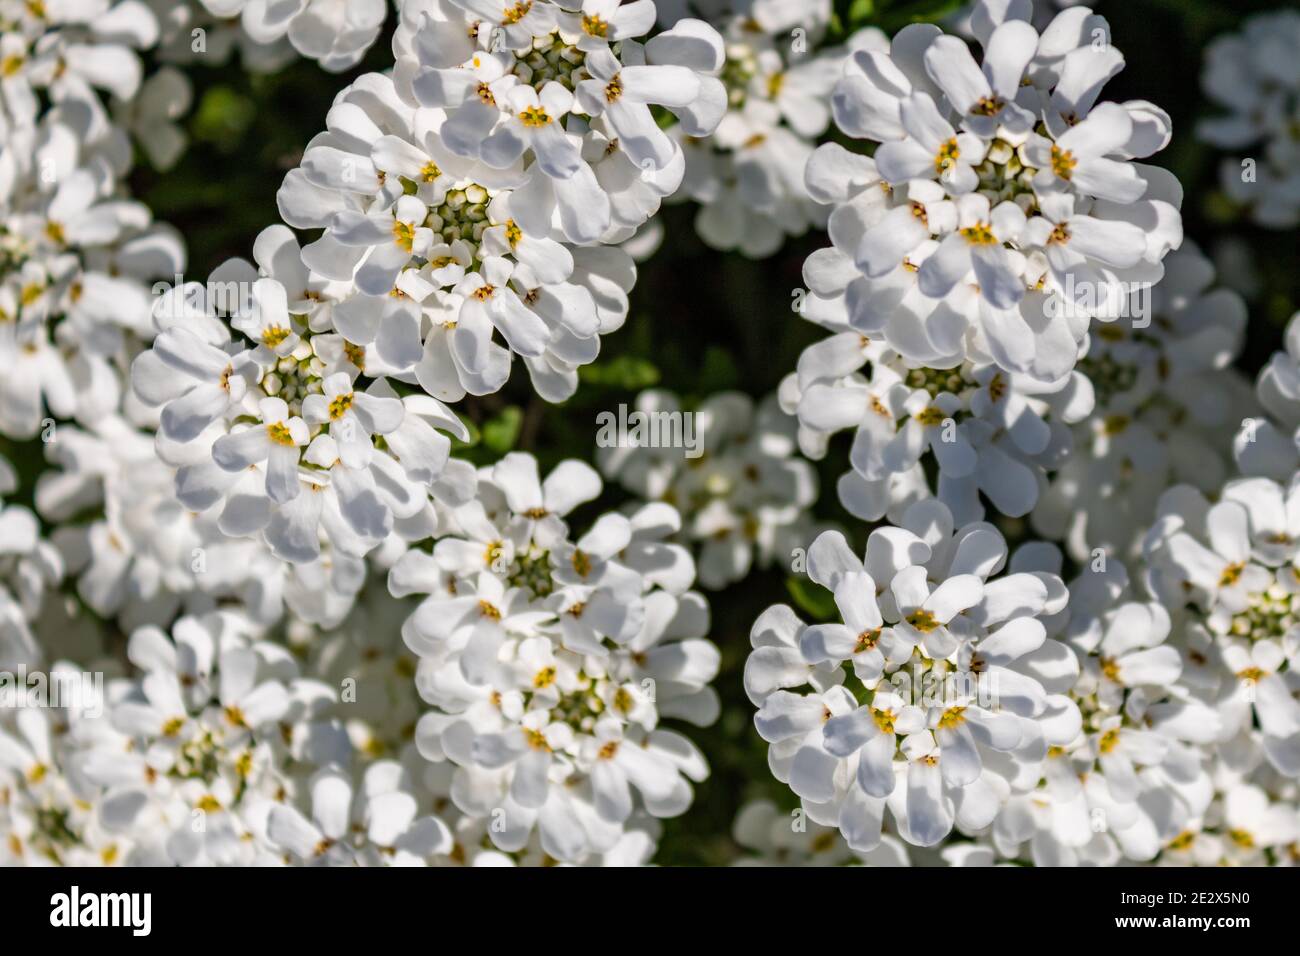 White flower cluster of evergreen candytuft (Iberis sempervirens) in spring, top view and full frame Stock Photo